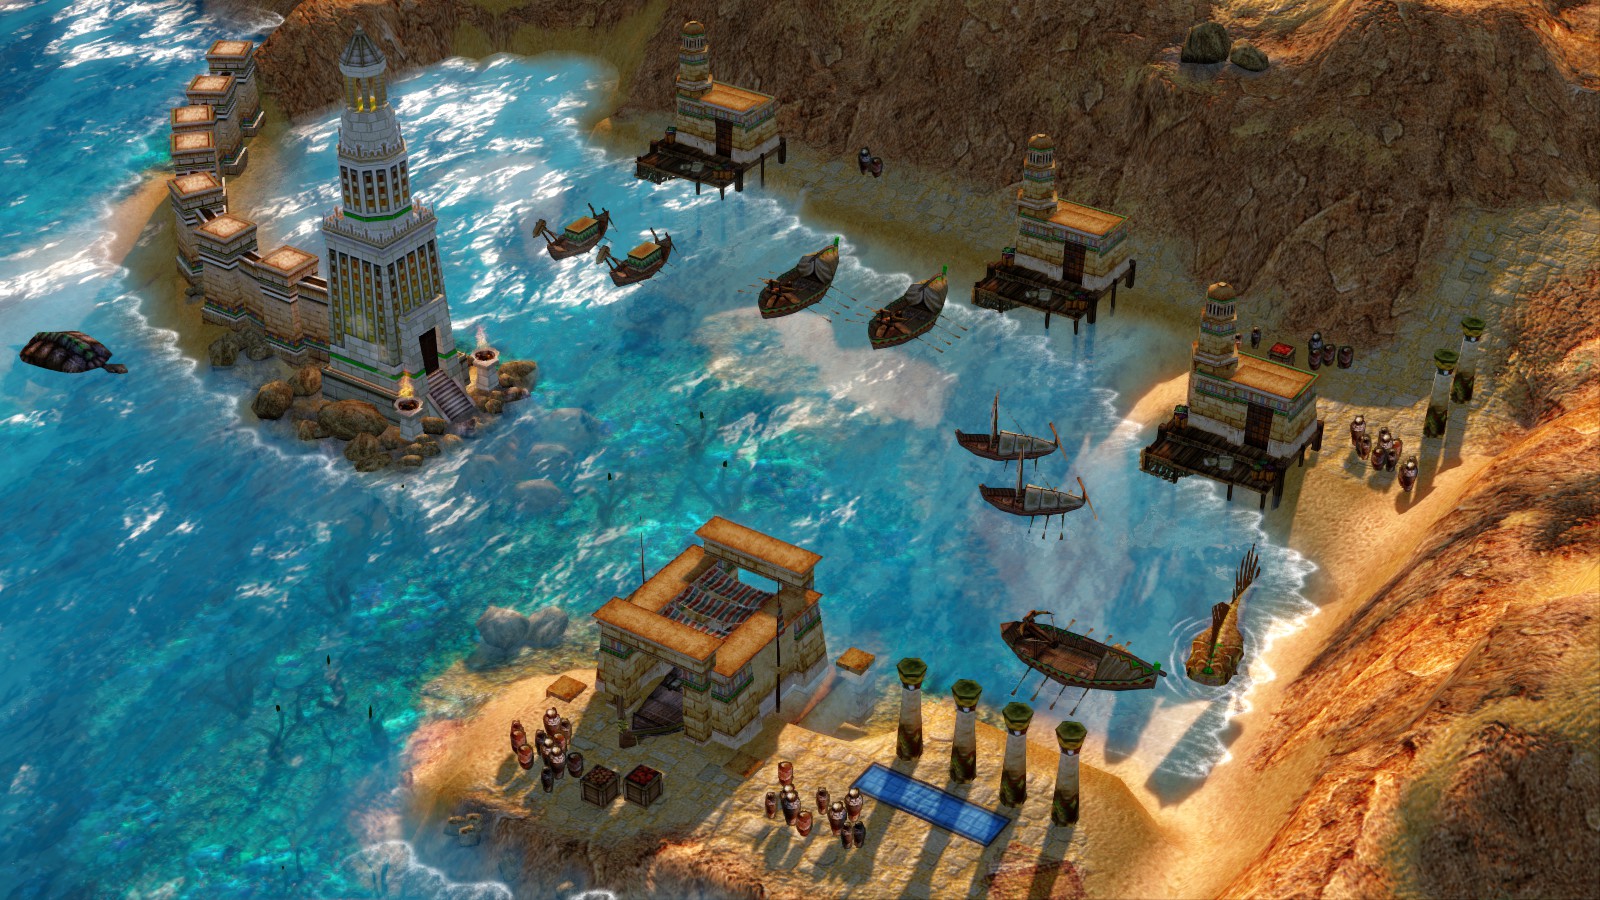 Rise of Nations: Extended Edition no Steam